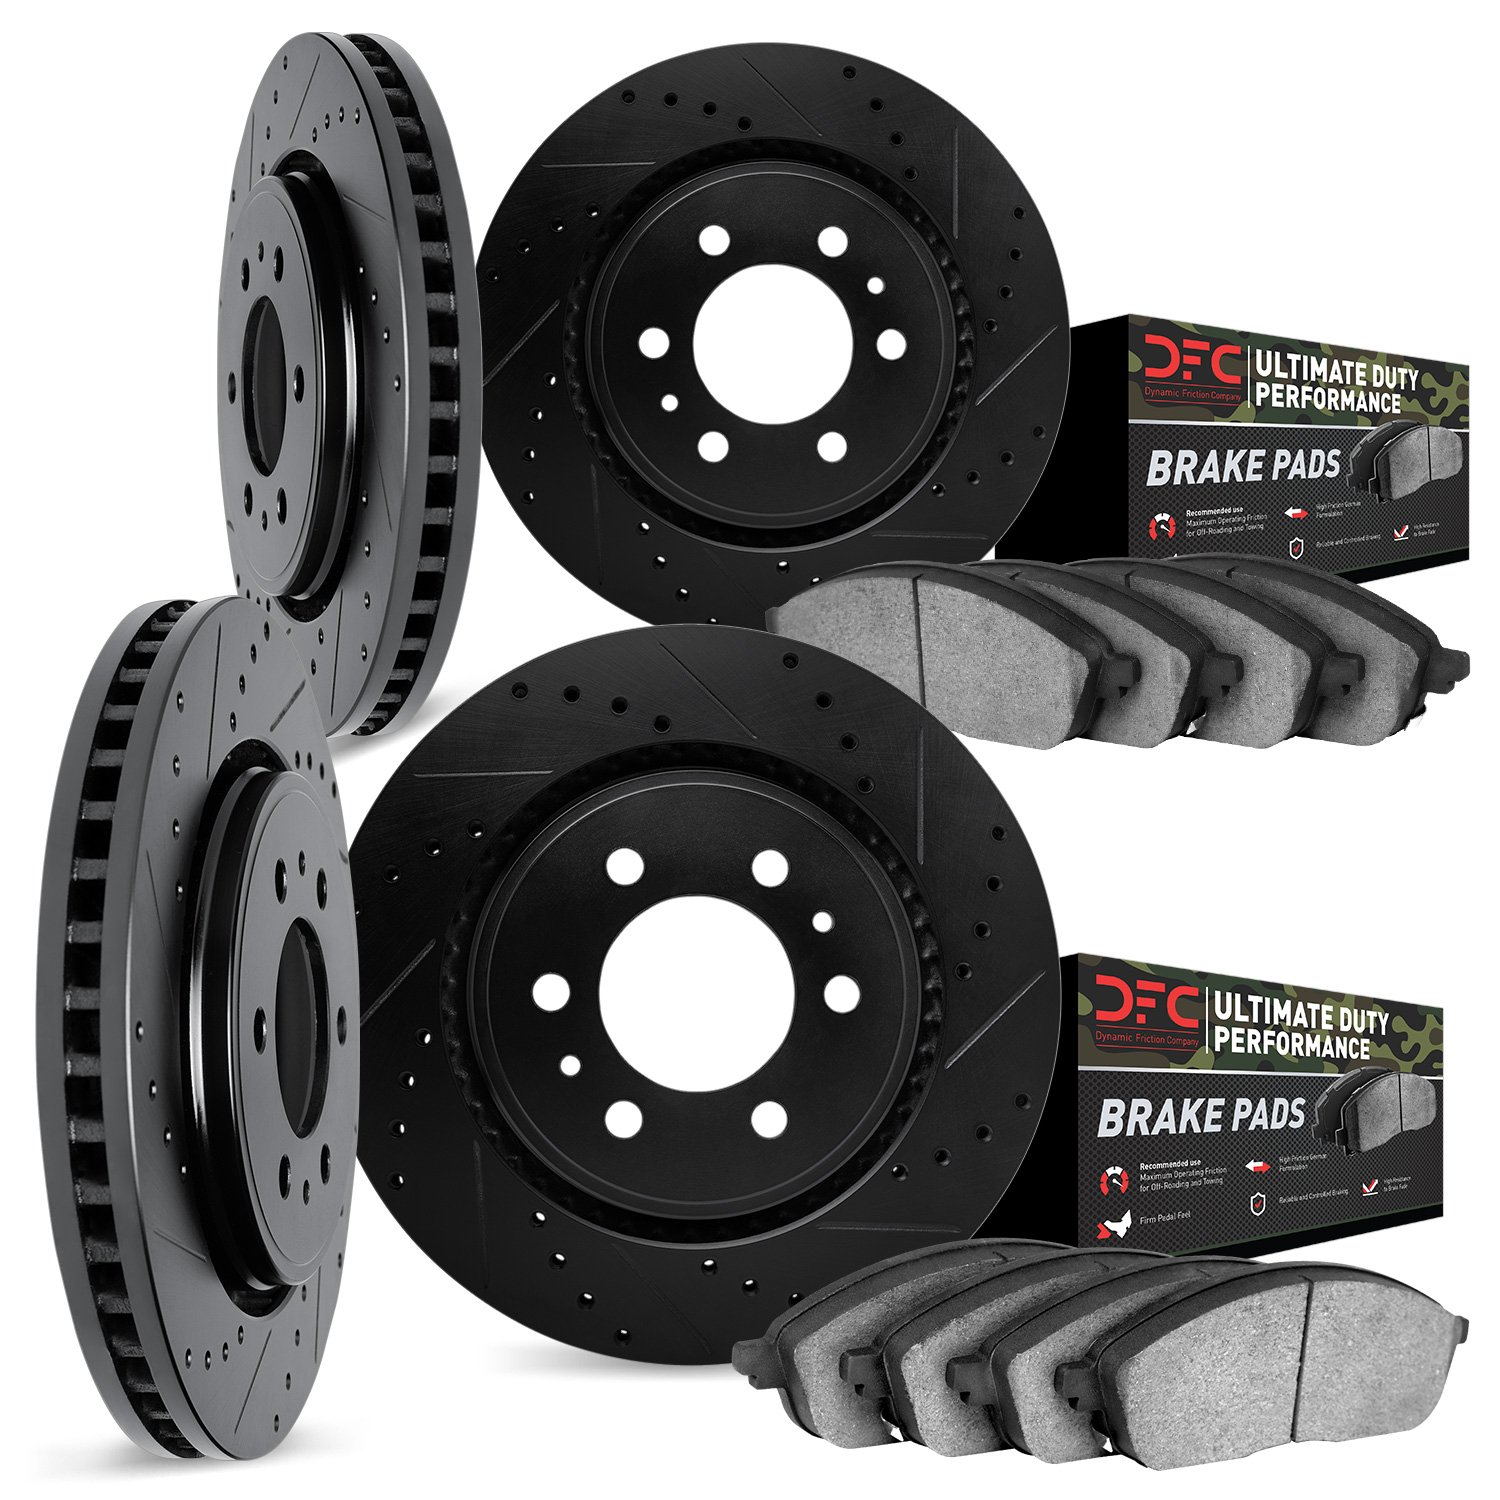 8404-67007 Drilled/Slotted Brake Rotors with Ultimate-Duty Brake Pads Kit [Black], Fits Select Infiniti/Nissan, Position: Front